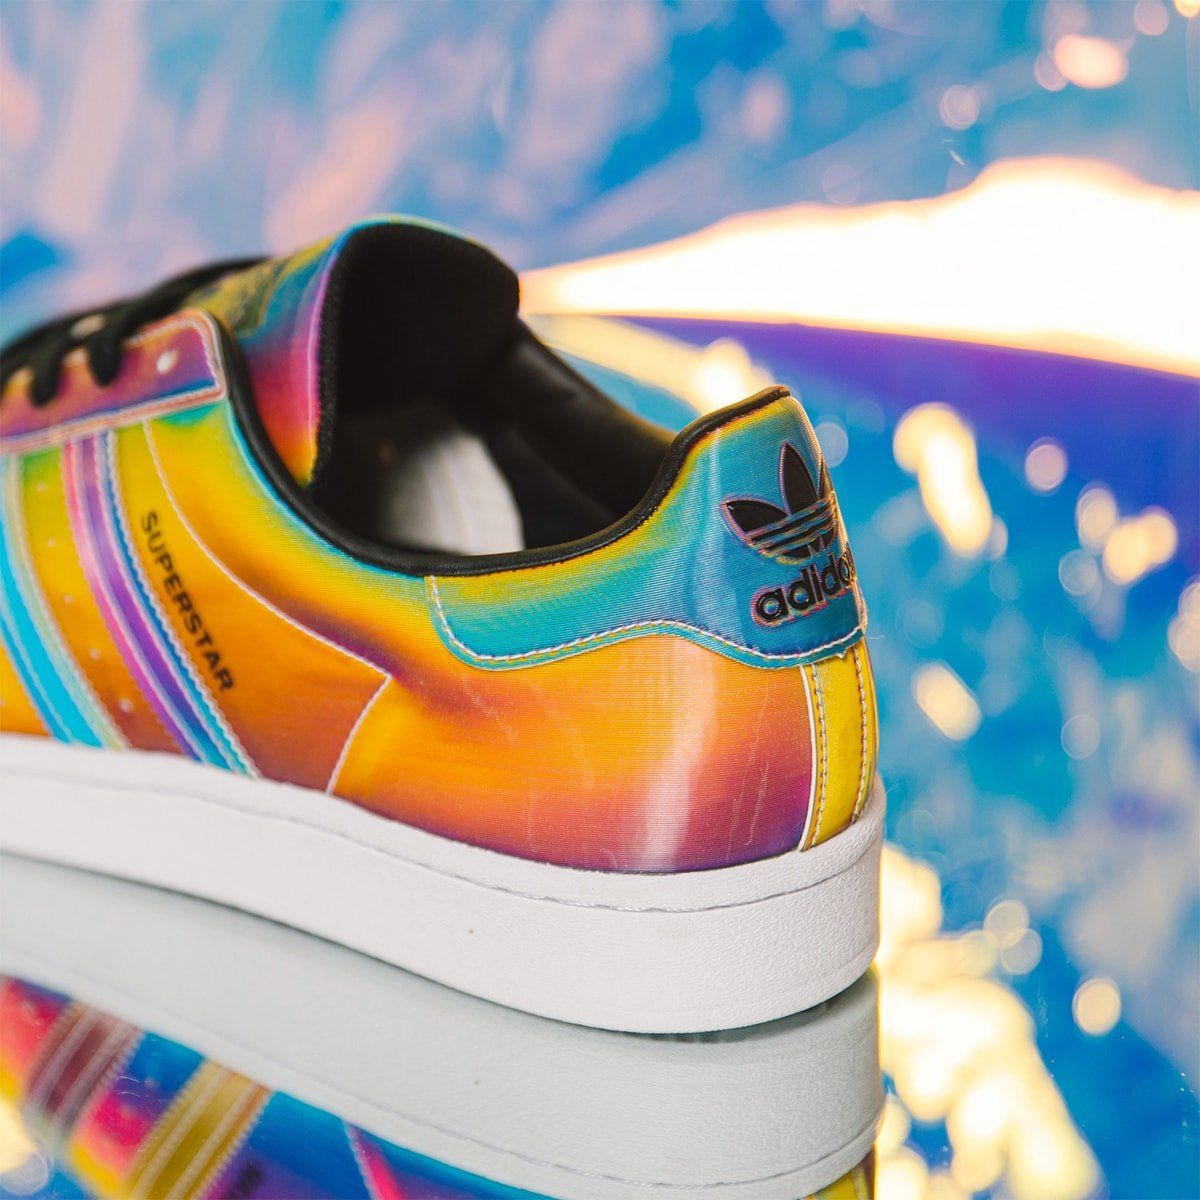 The adidas Superstar Appears in "Rainbow Iridescent" HOUSE OF HEAT